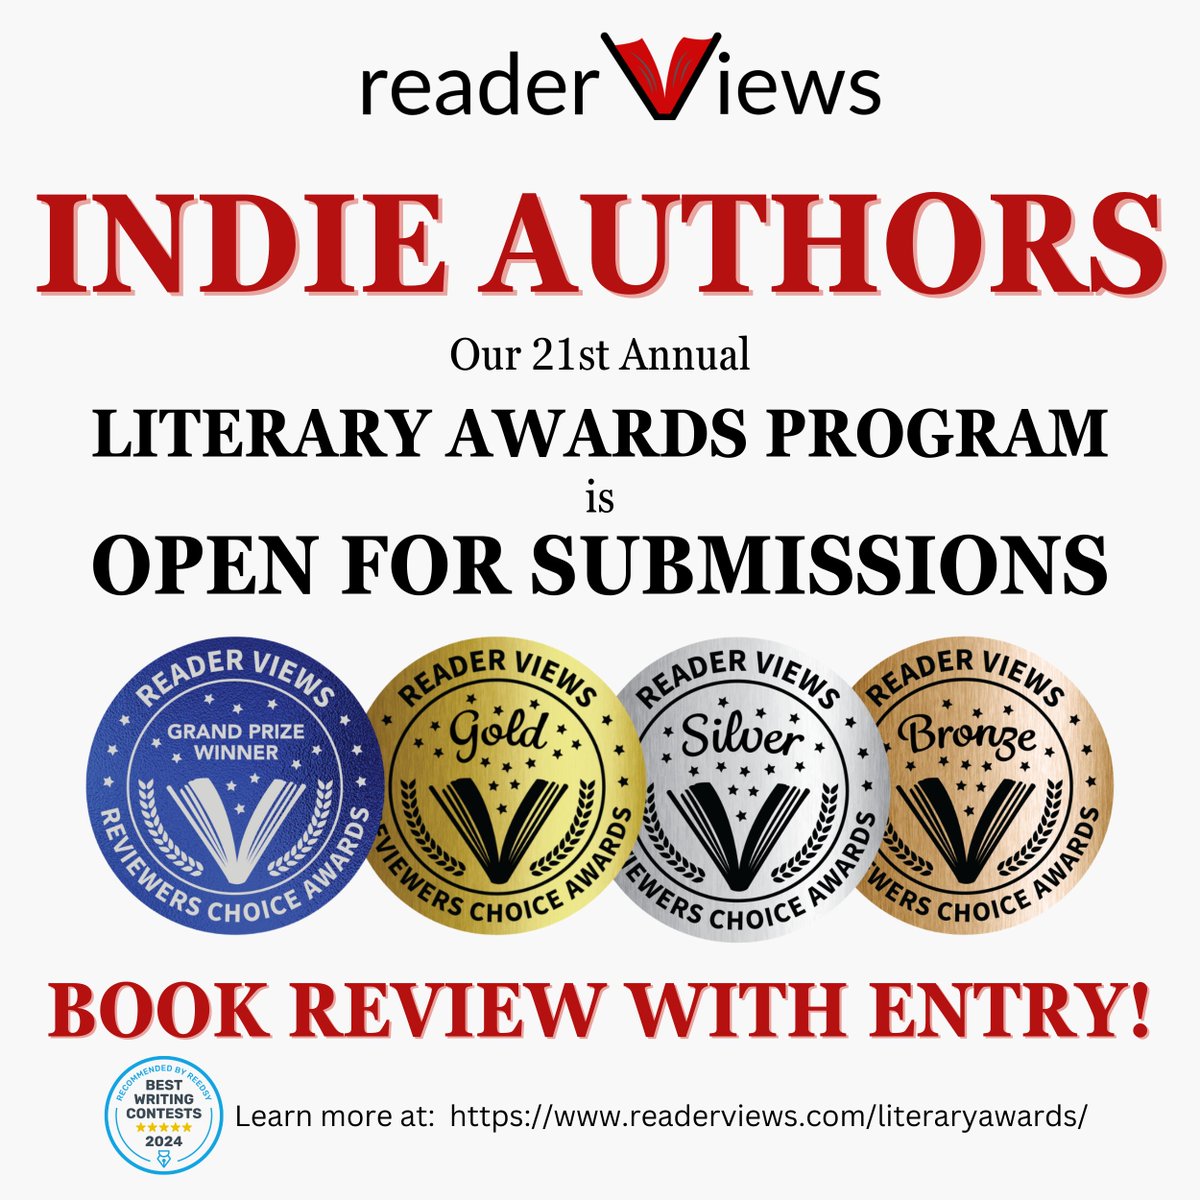 NOW OPEN FOR SUBMISSIONS!
readerviews.com/literaryawards/
#writingcommunity #indiewriter #bookstagram